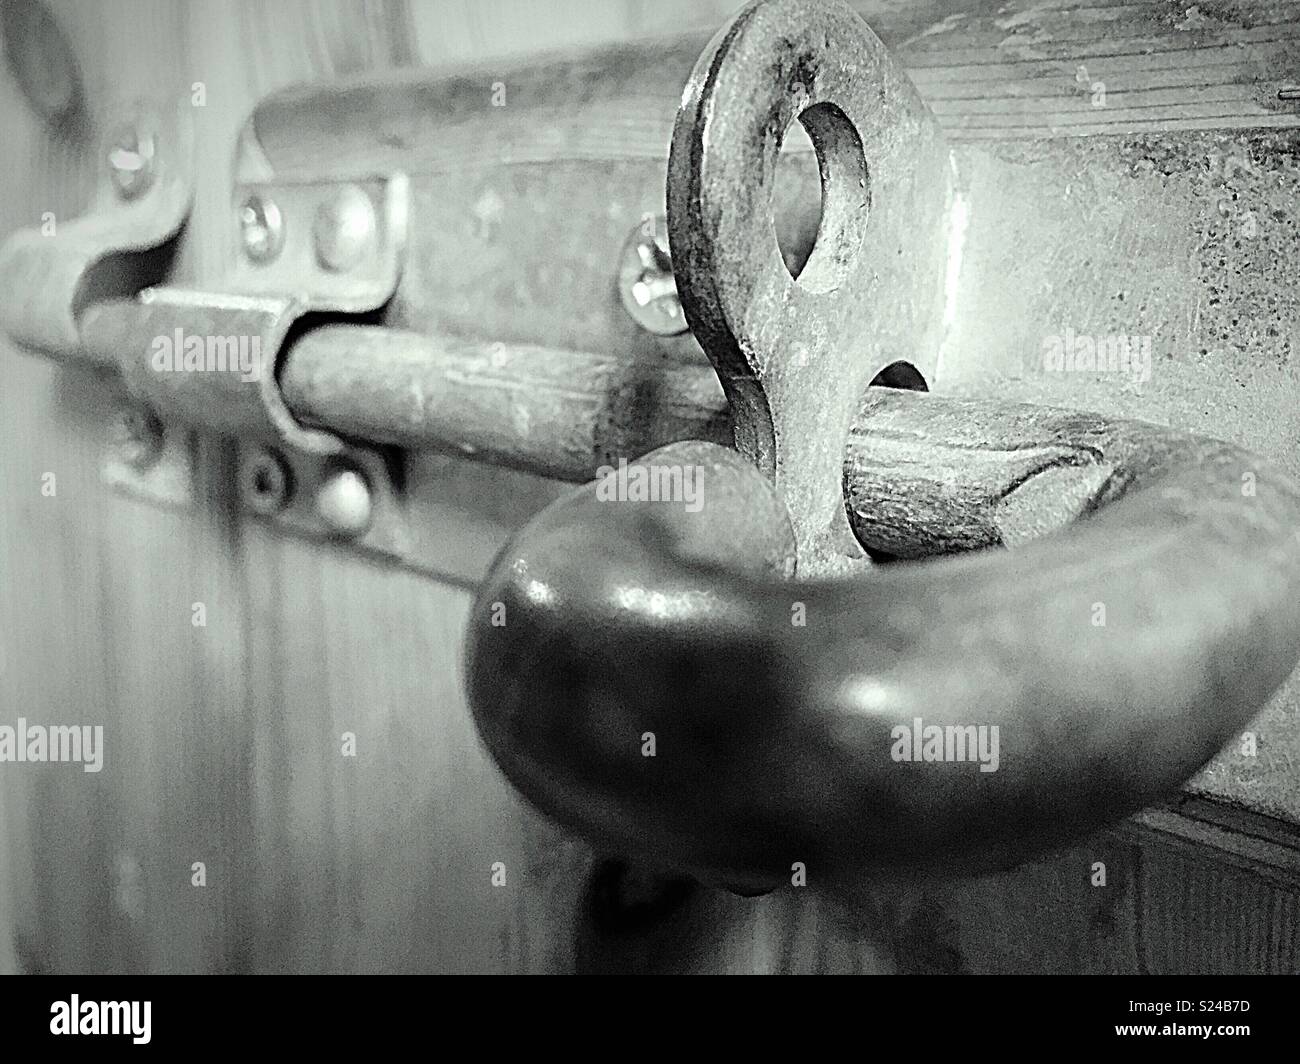 Bolted and secure Stock Photo